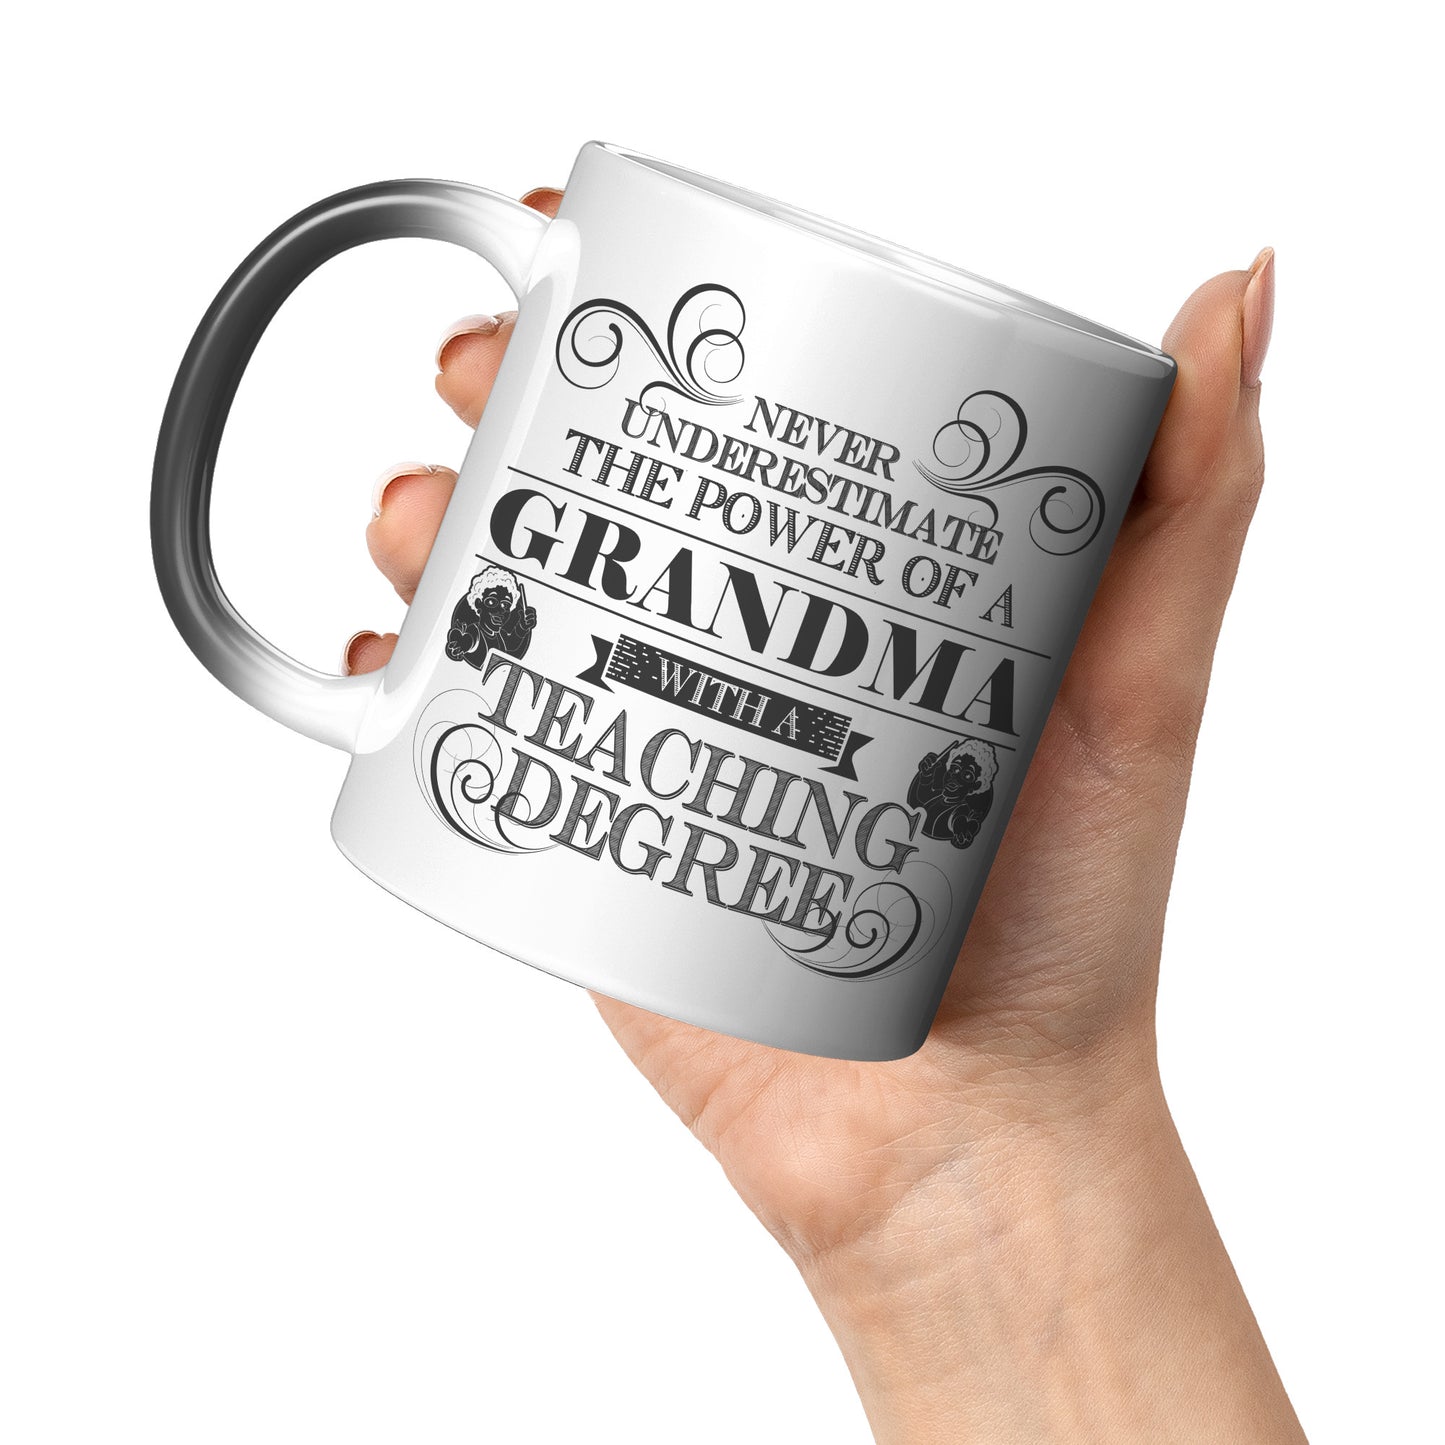 Never Underestimate The Power Of A Grandma With A Teaching Degree | Magic Mug